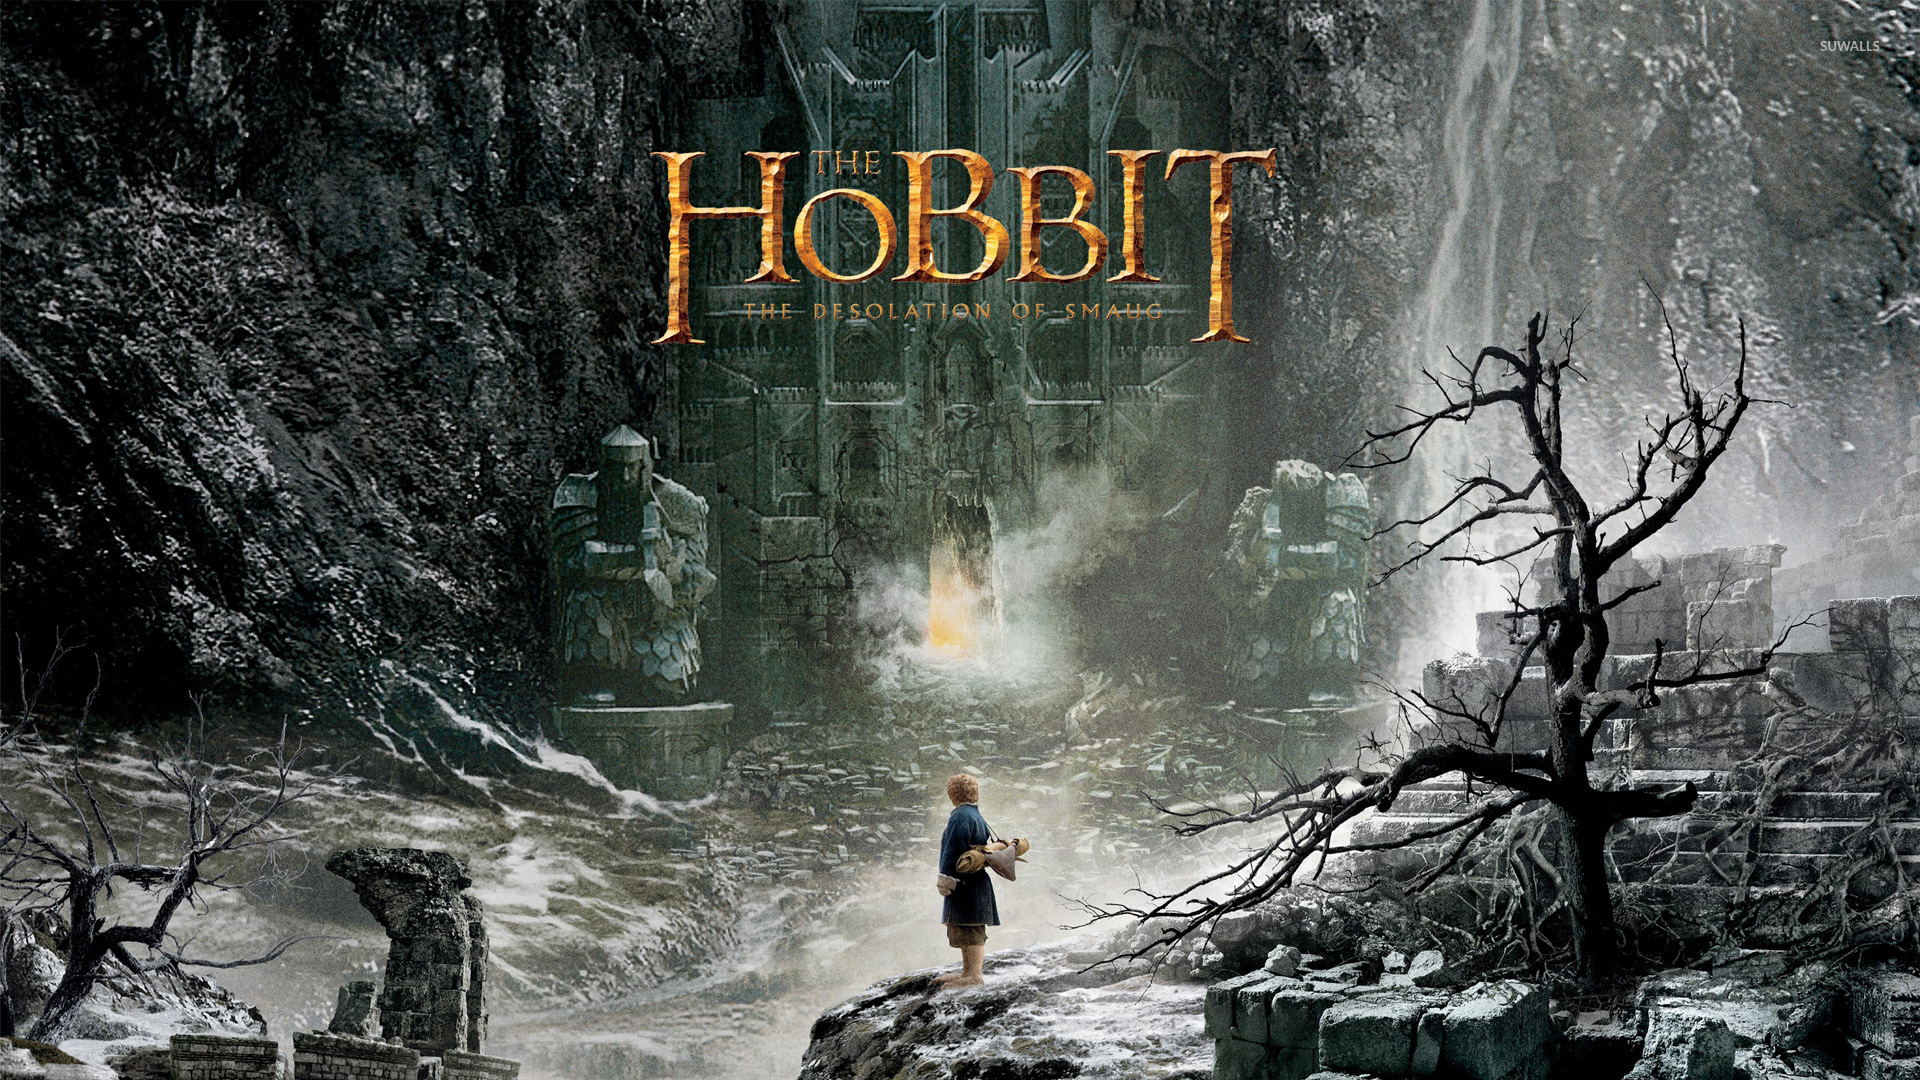 The Hobbit: The Desolation of Smaug download the new for windows